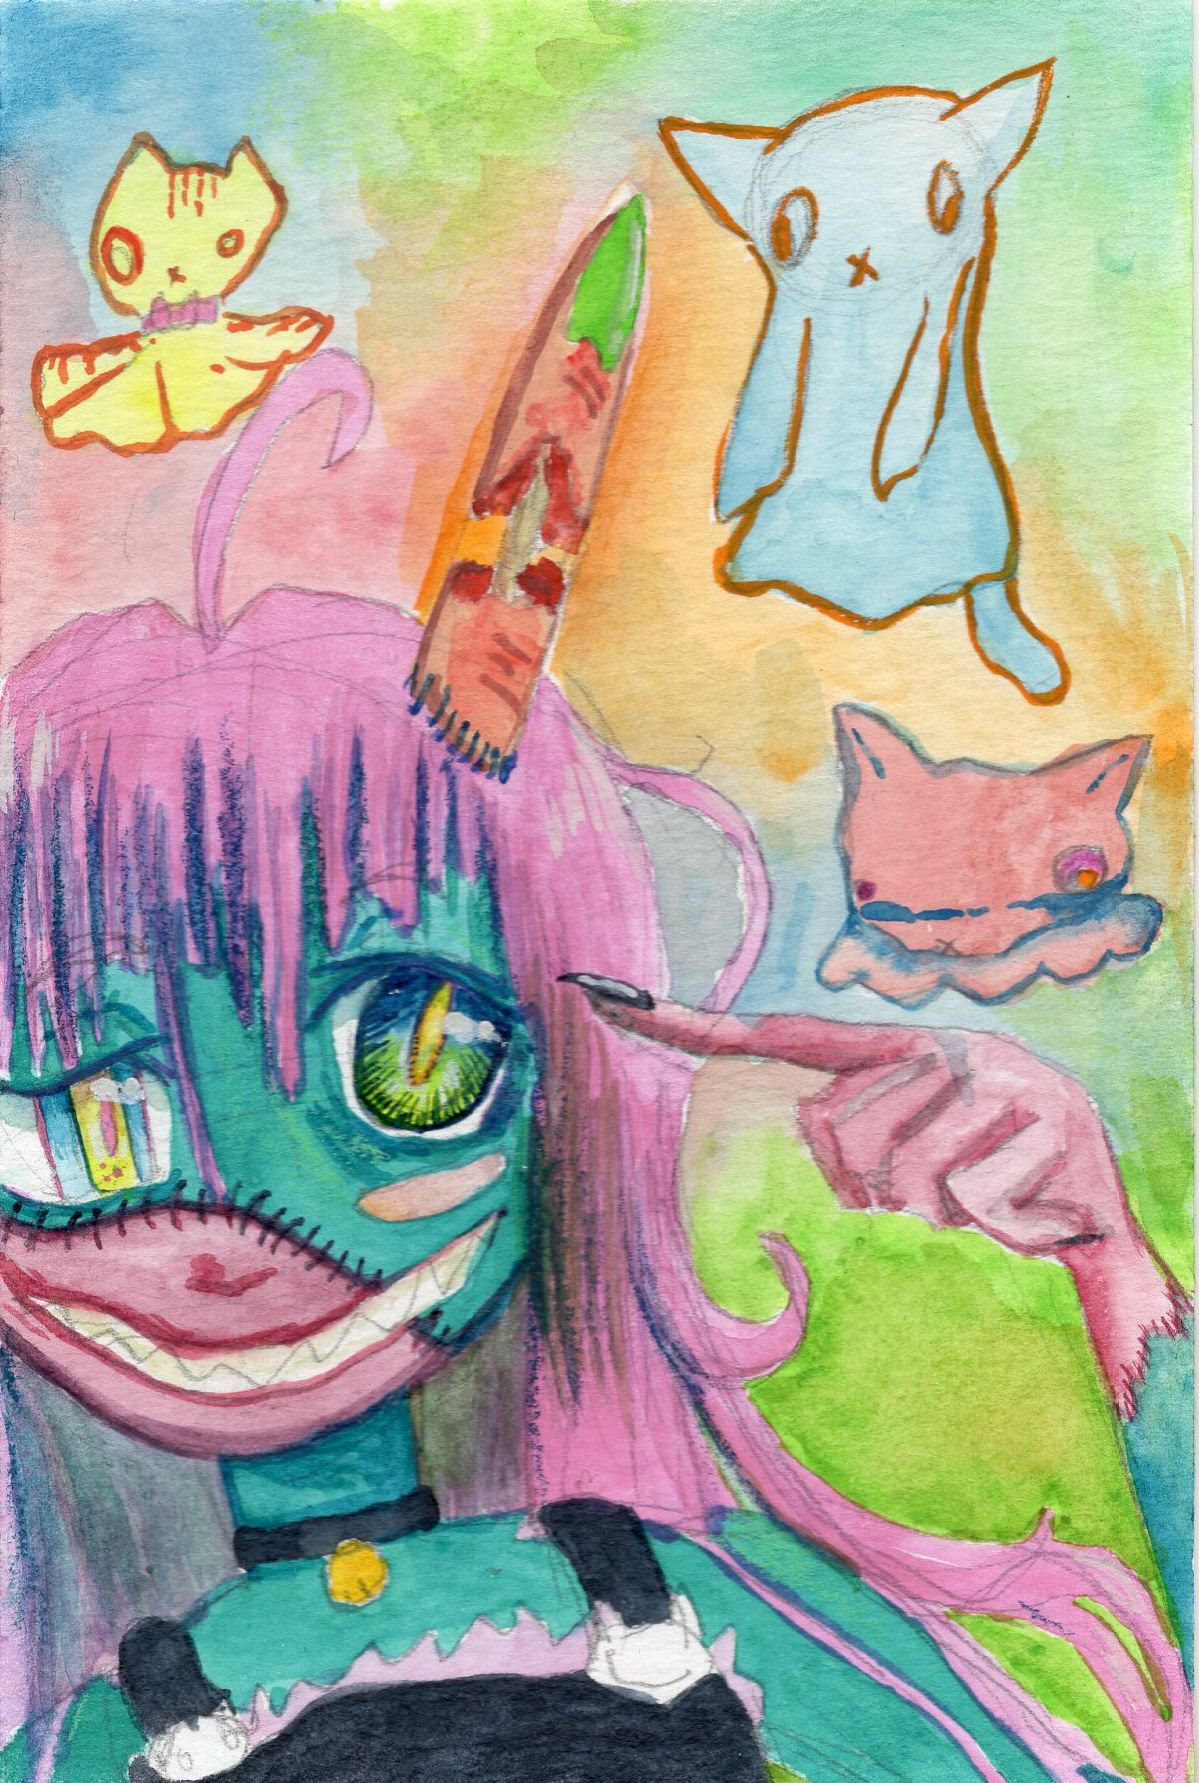 a pink haired zombie girl poking her head with her finger. another finger is also growing out of her head. she is surrounded by wobbly colorful cat ghosts